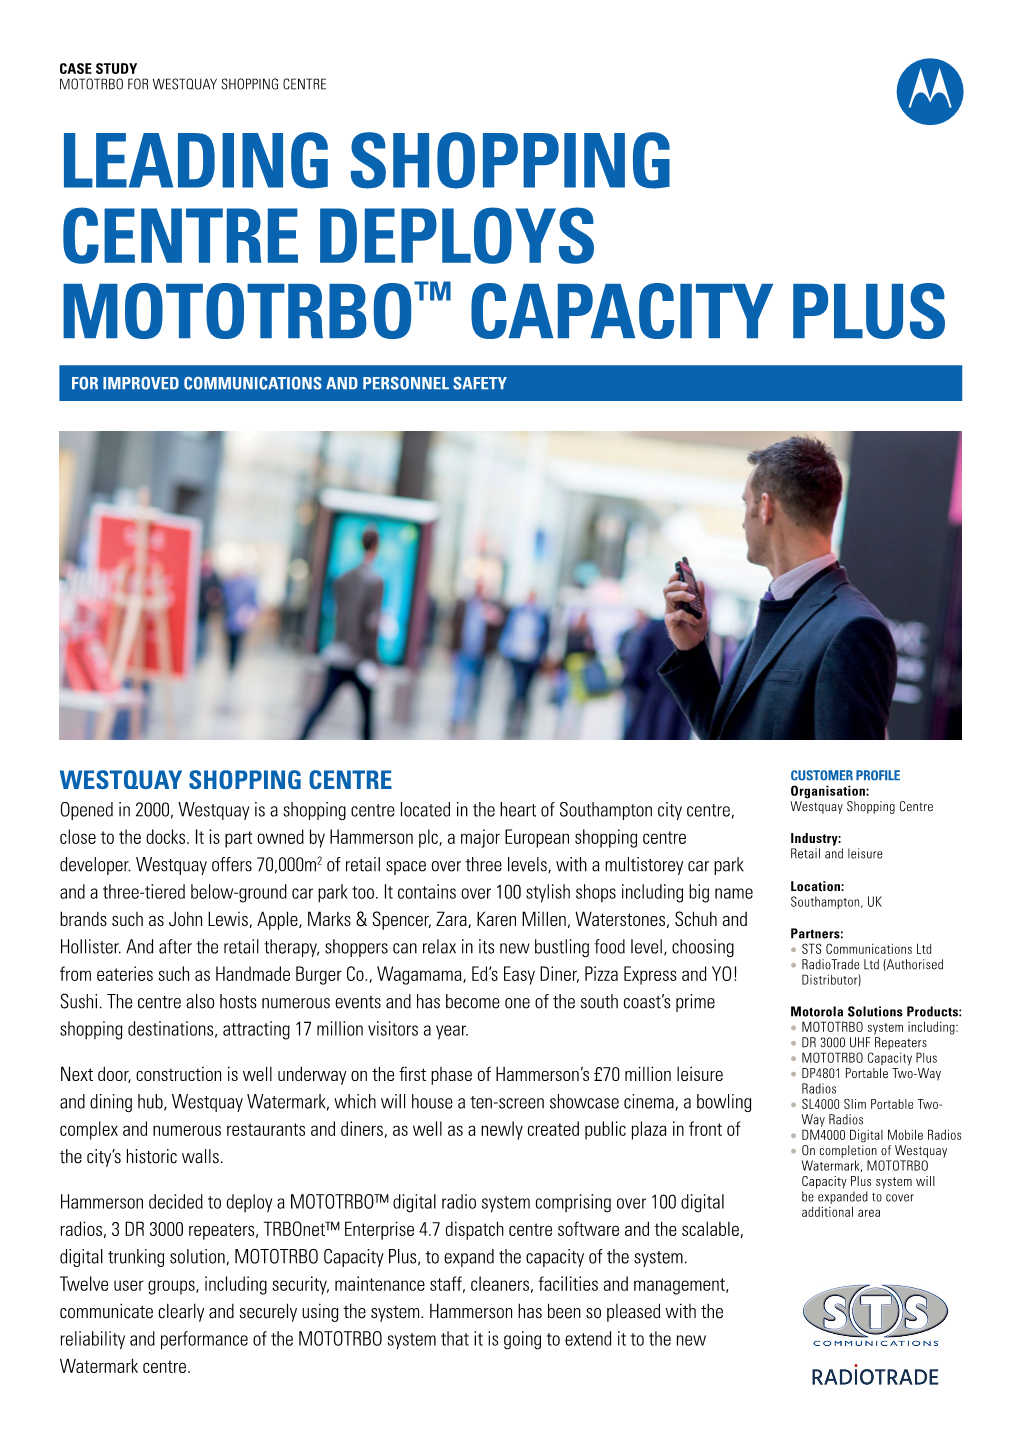 Leading Shopping Centre Deploys MOTOTRBO Capacity Plus And